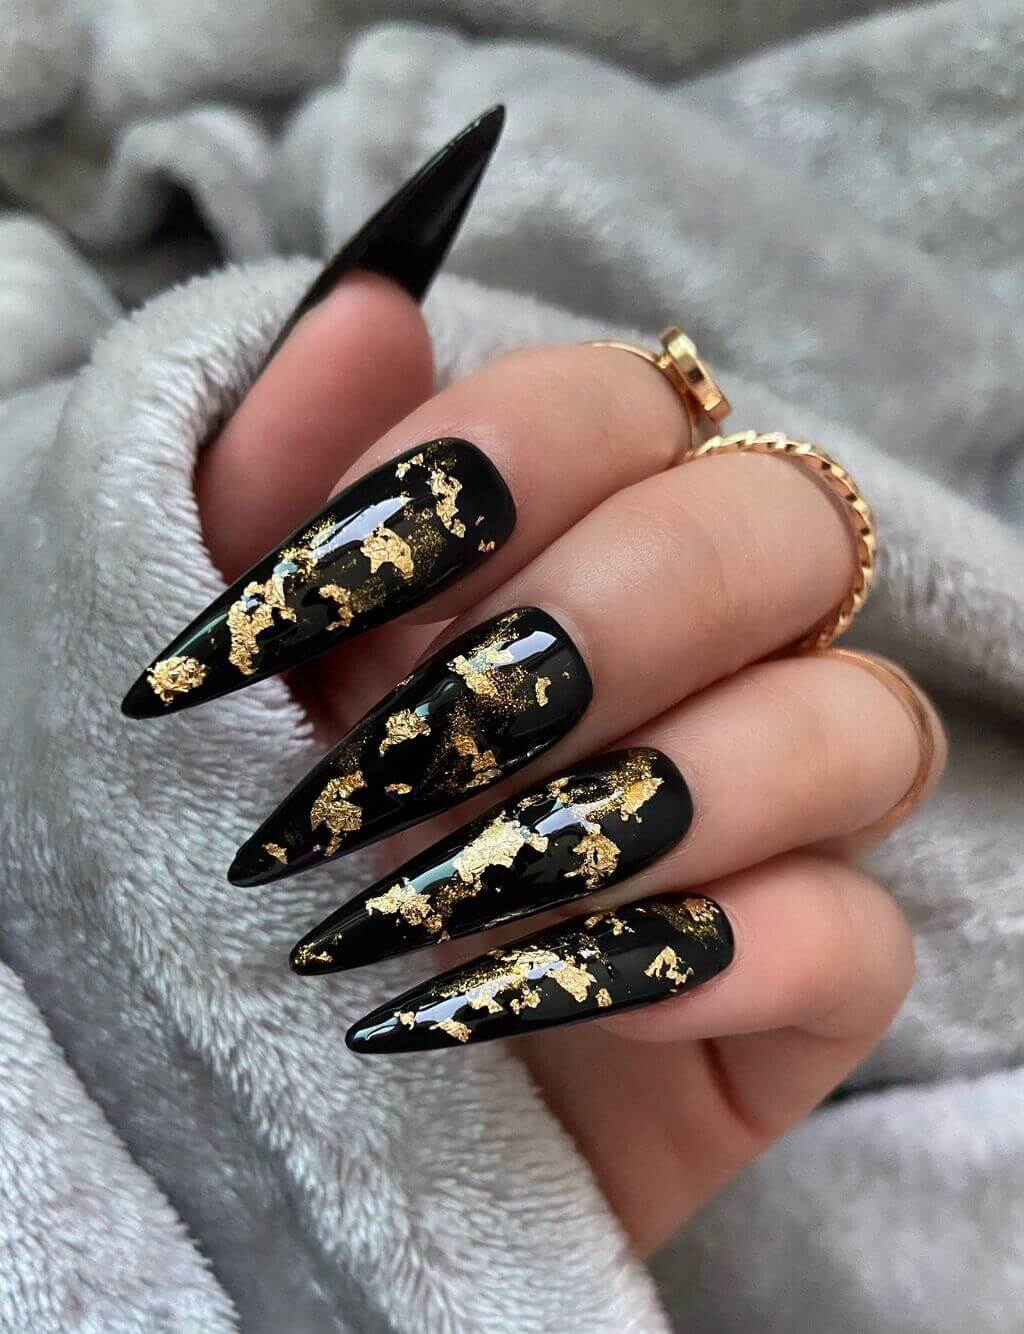 A woman's hand with black and gold nail polish
